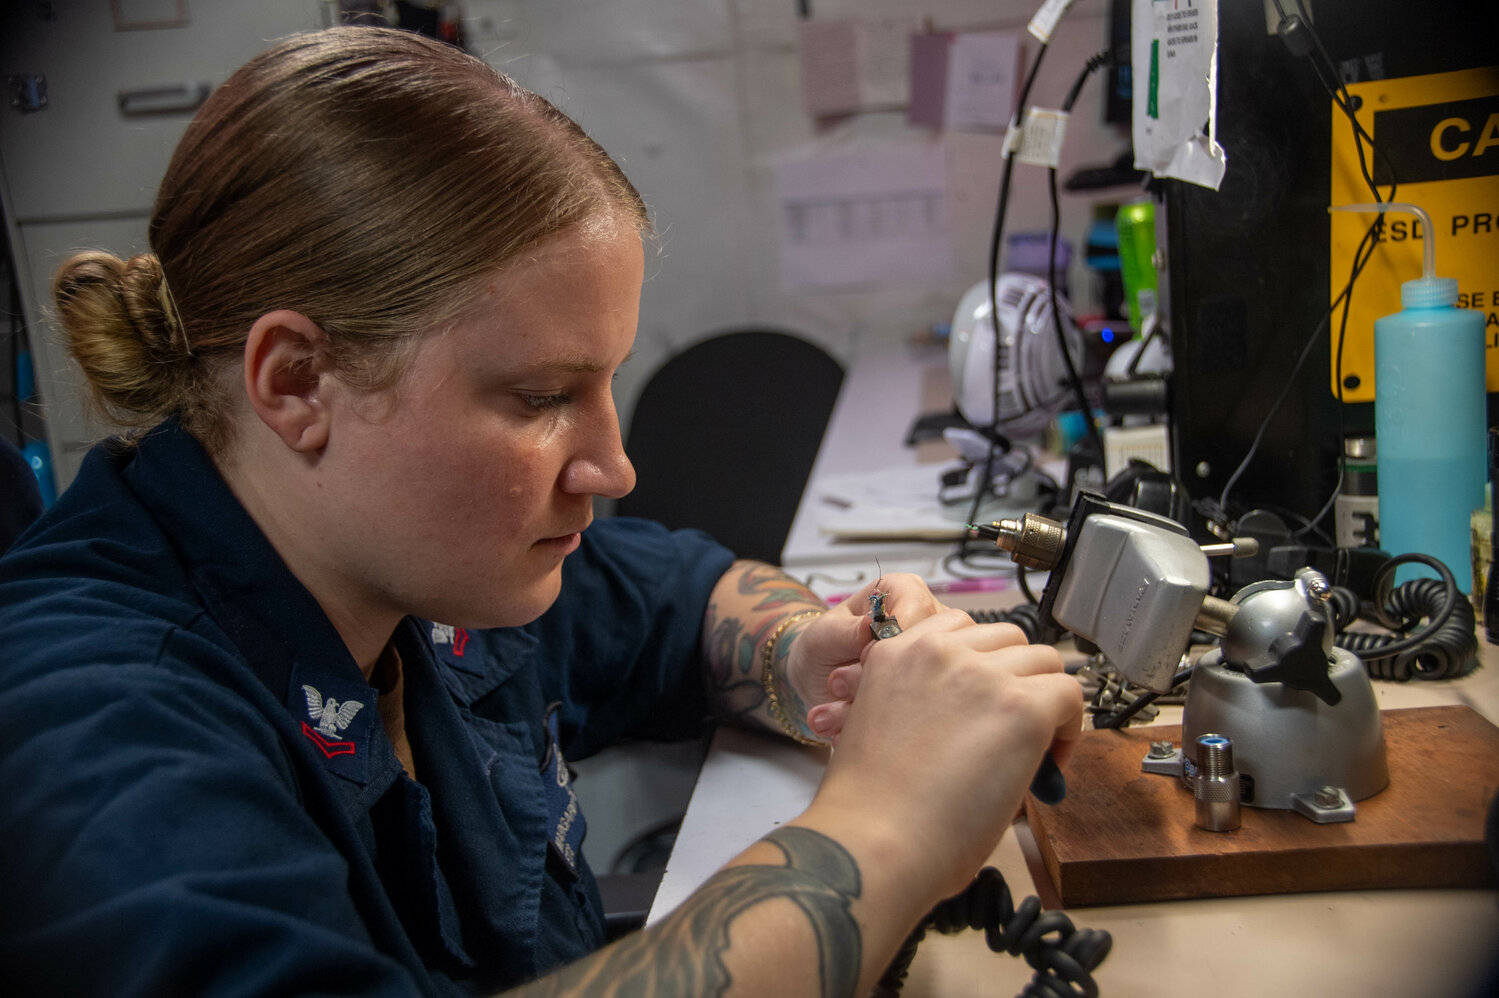 230421-N-KU796-1050 SOUTH CHINA SEA (April 21, 2023) U.S. Navy Electronics Technician 2nd Class Margarita Gonzalez, from Okeechobee, Fla., repairs a headset cable aboard the aircraft carrier USS Nimitz (CVN 68). Nimitz is in U.S. 7th Fleet conducting routine operations. 7th Fleet is the U.S. Navy's largest forward-deployed numbered fleet, and routinely interacts and operates with allies and partners in preserving a free and open Indo-Pacific region. (U.S. Navy photo by Mass Communication Specialist 2nd Class Samuel Osborn)